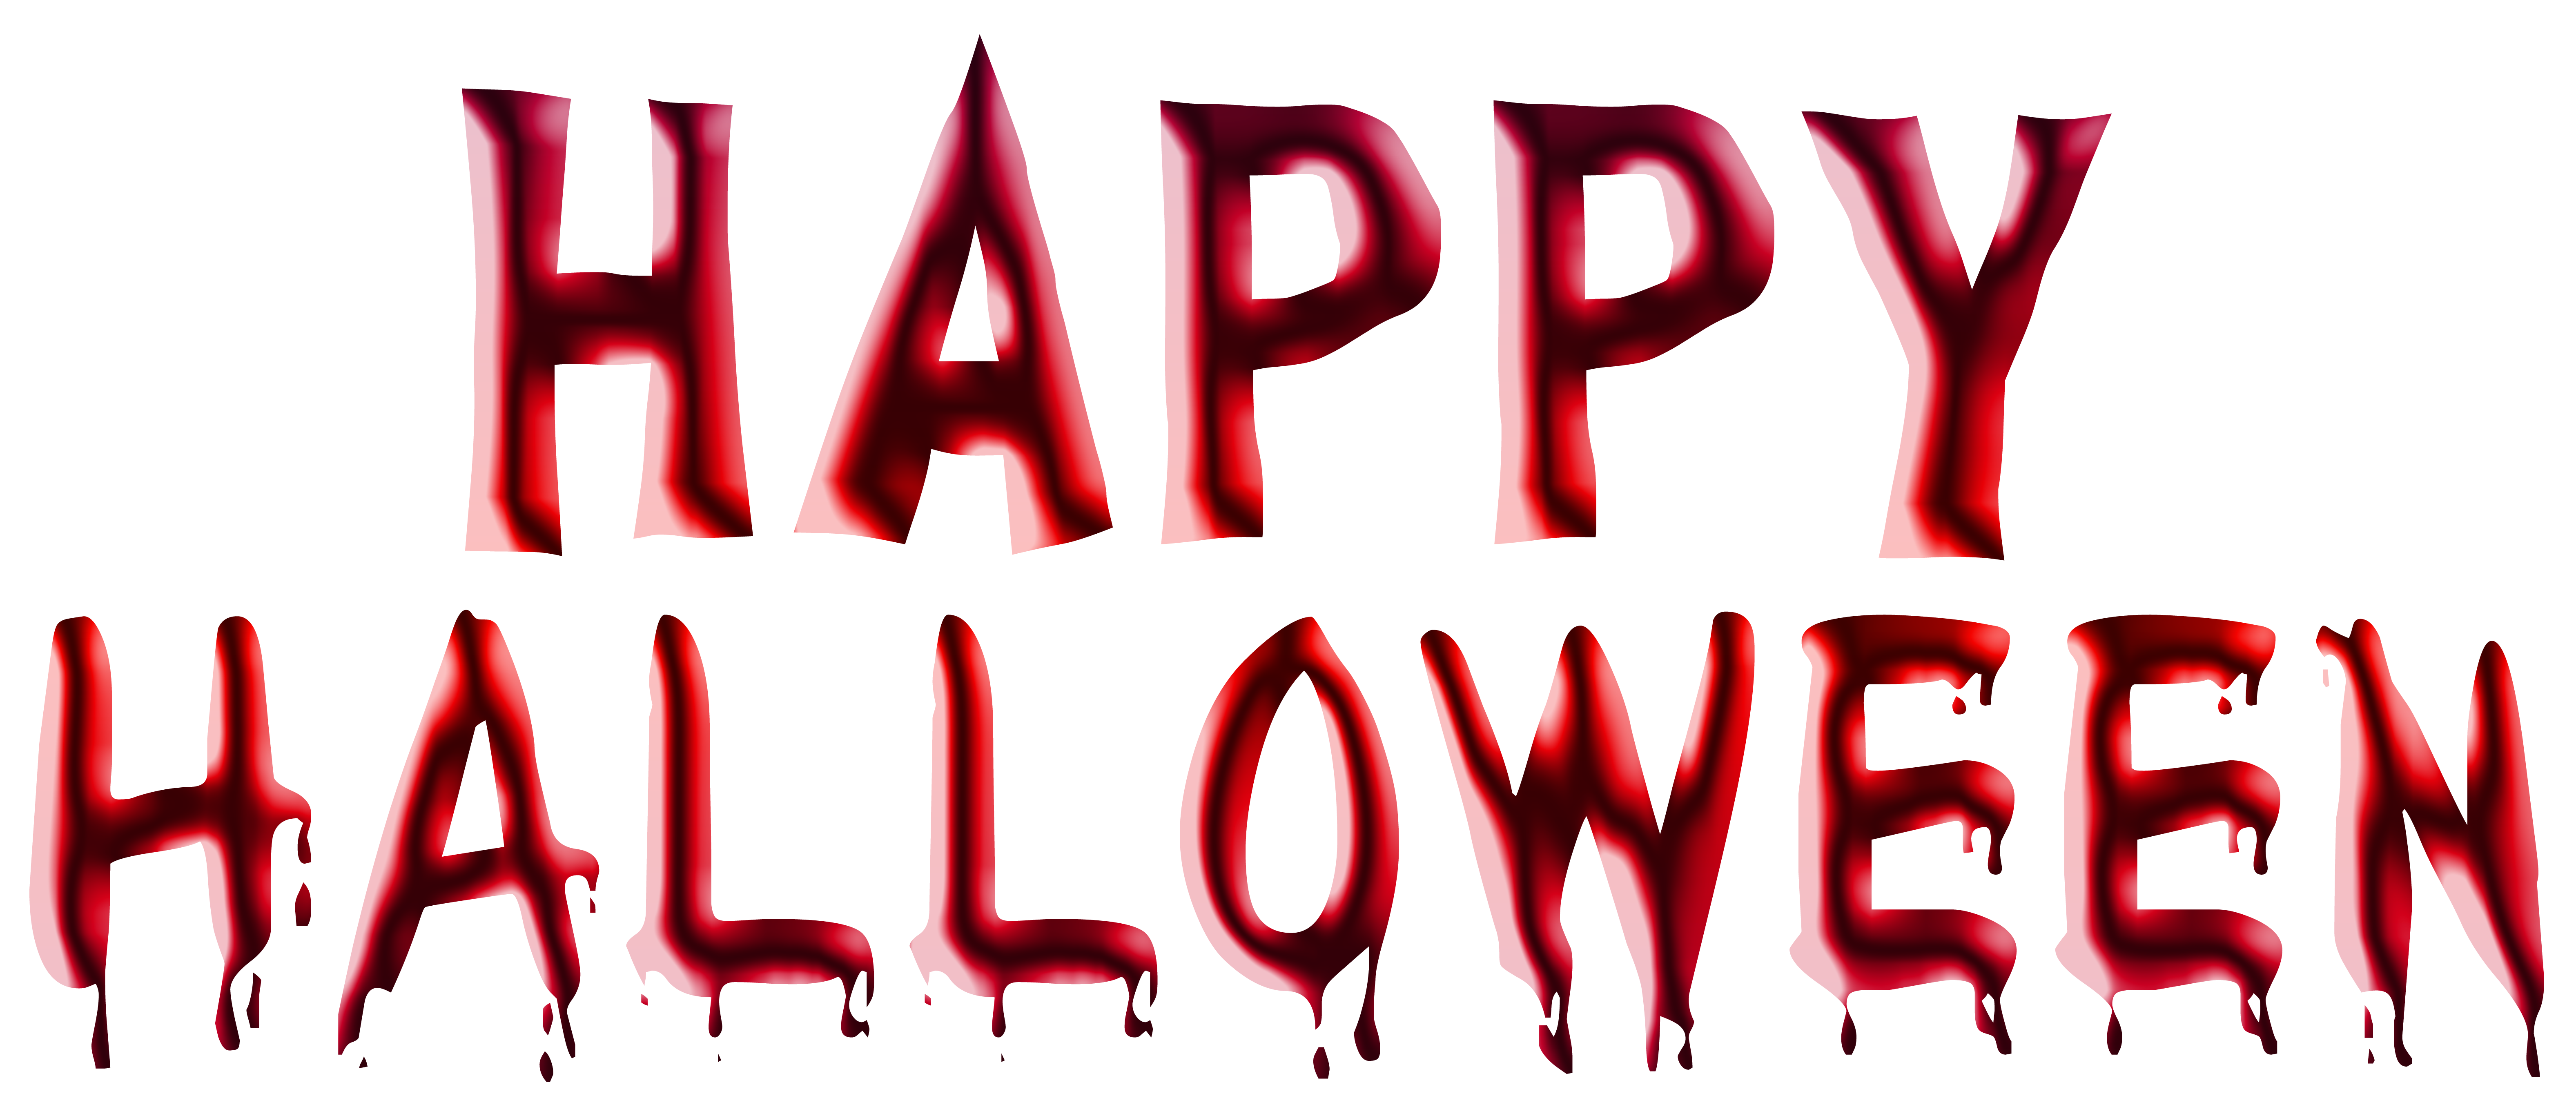 Download happy halloween clipart transparent 20 free Cliparts ...